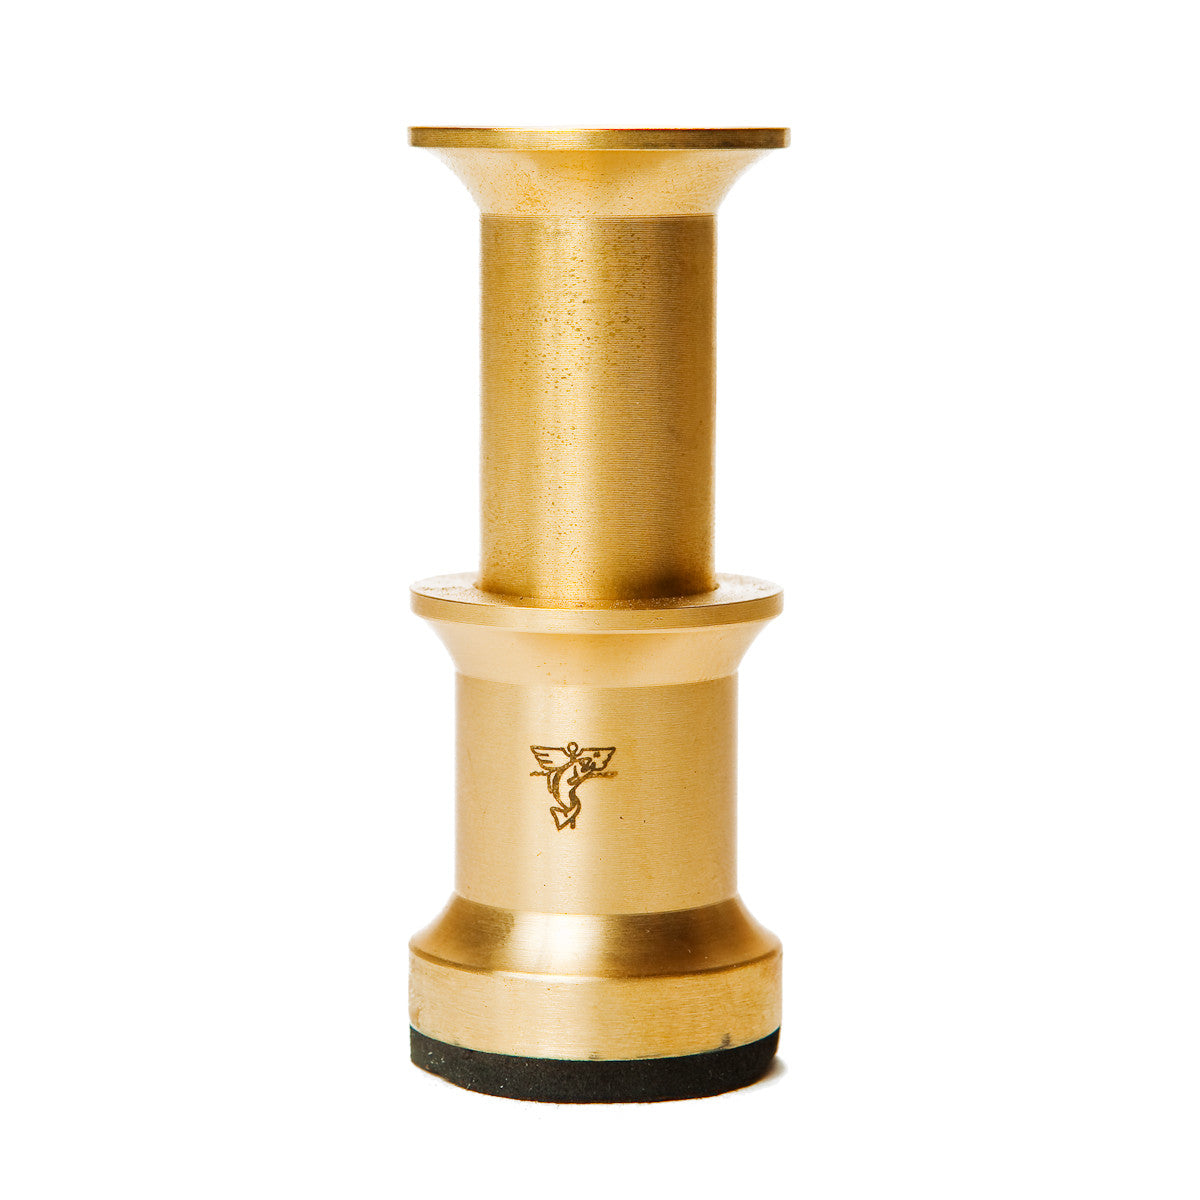 Dr. Slick Co. Brass Hair Stacker - 2.75 Inches